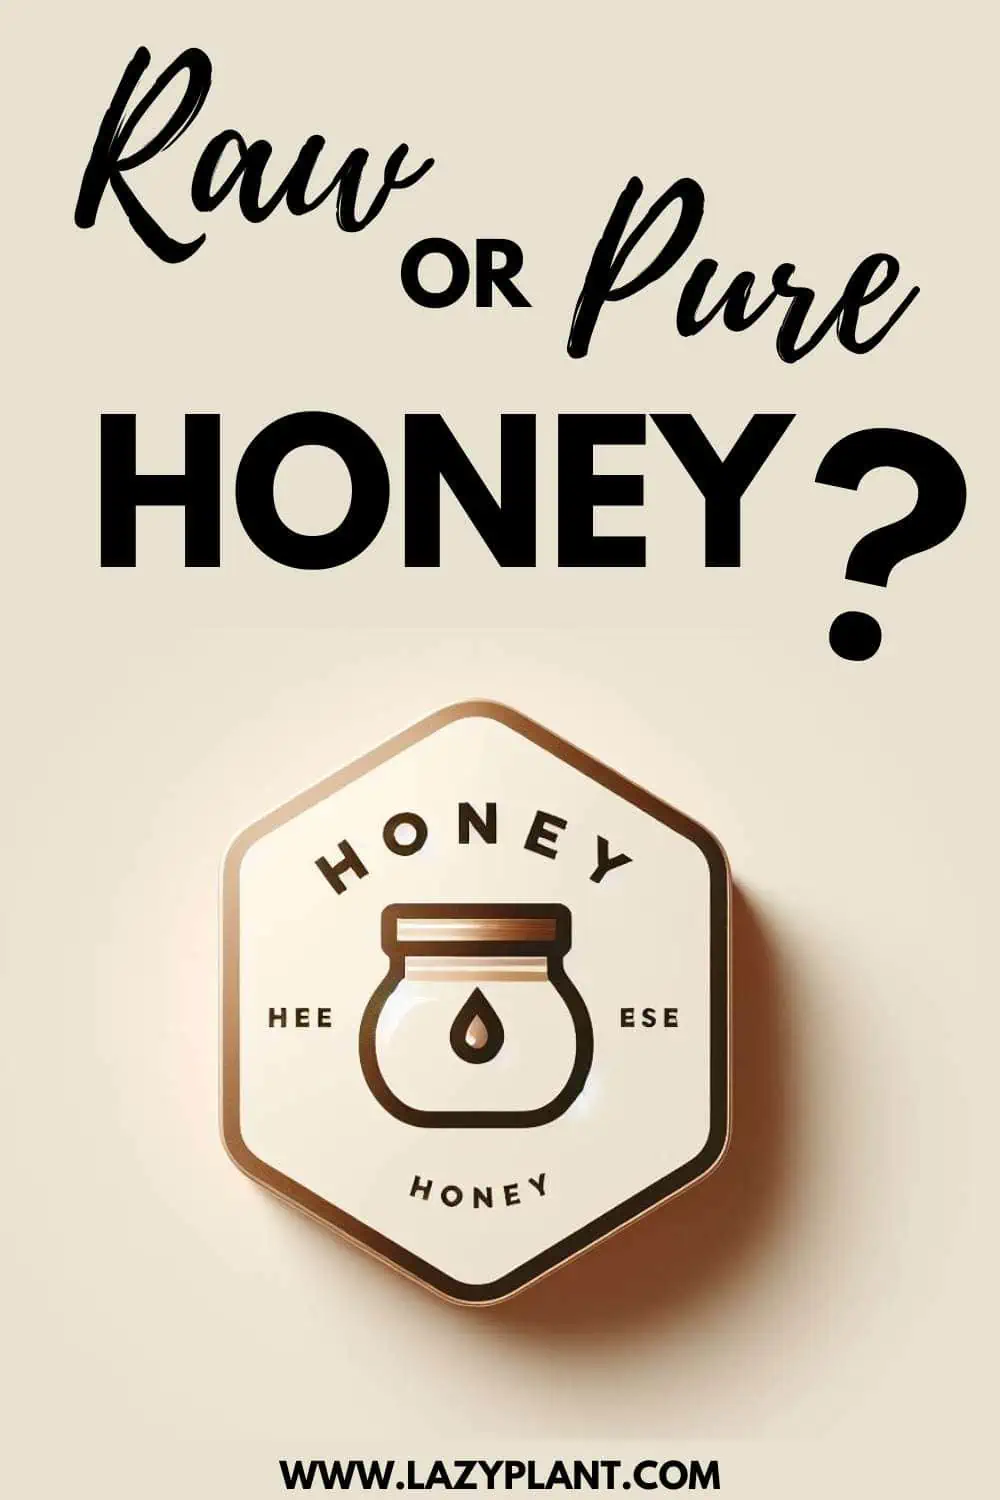 Raw or Pure Honey for Weight loss & good Health?